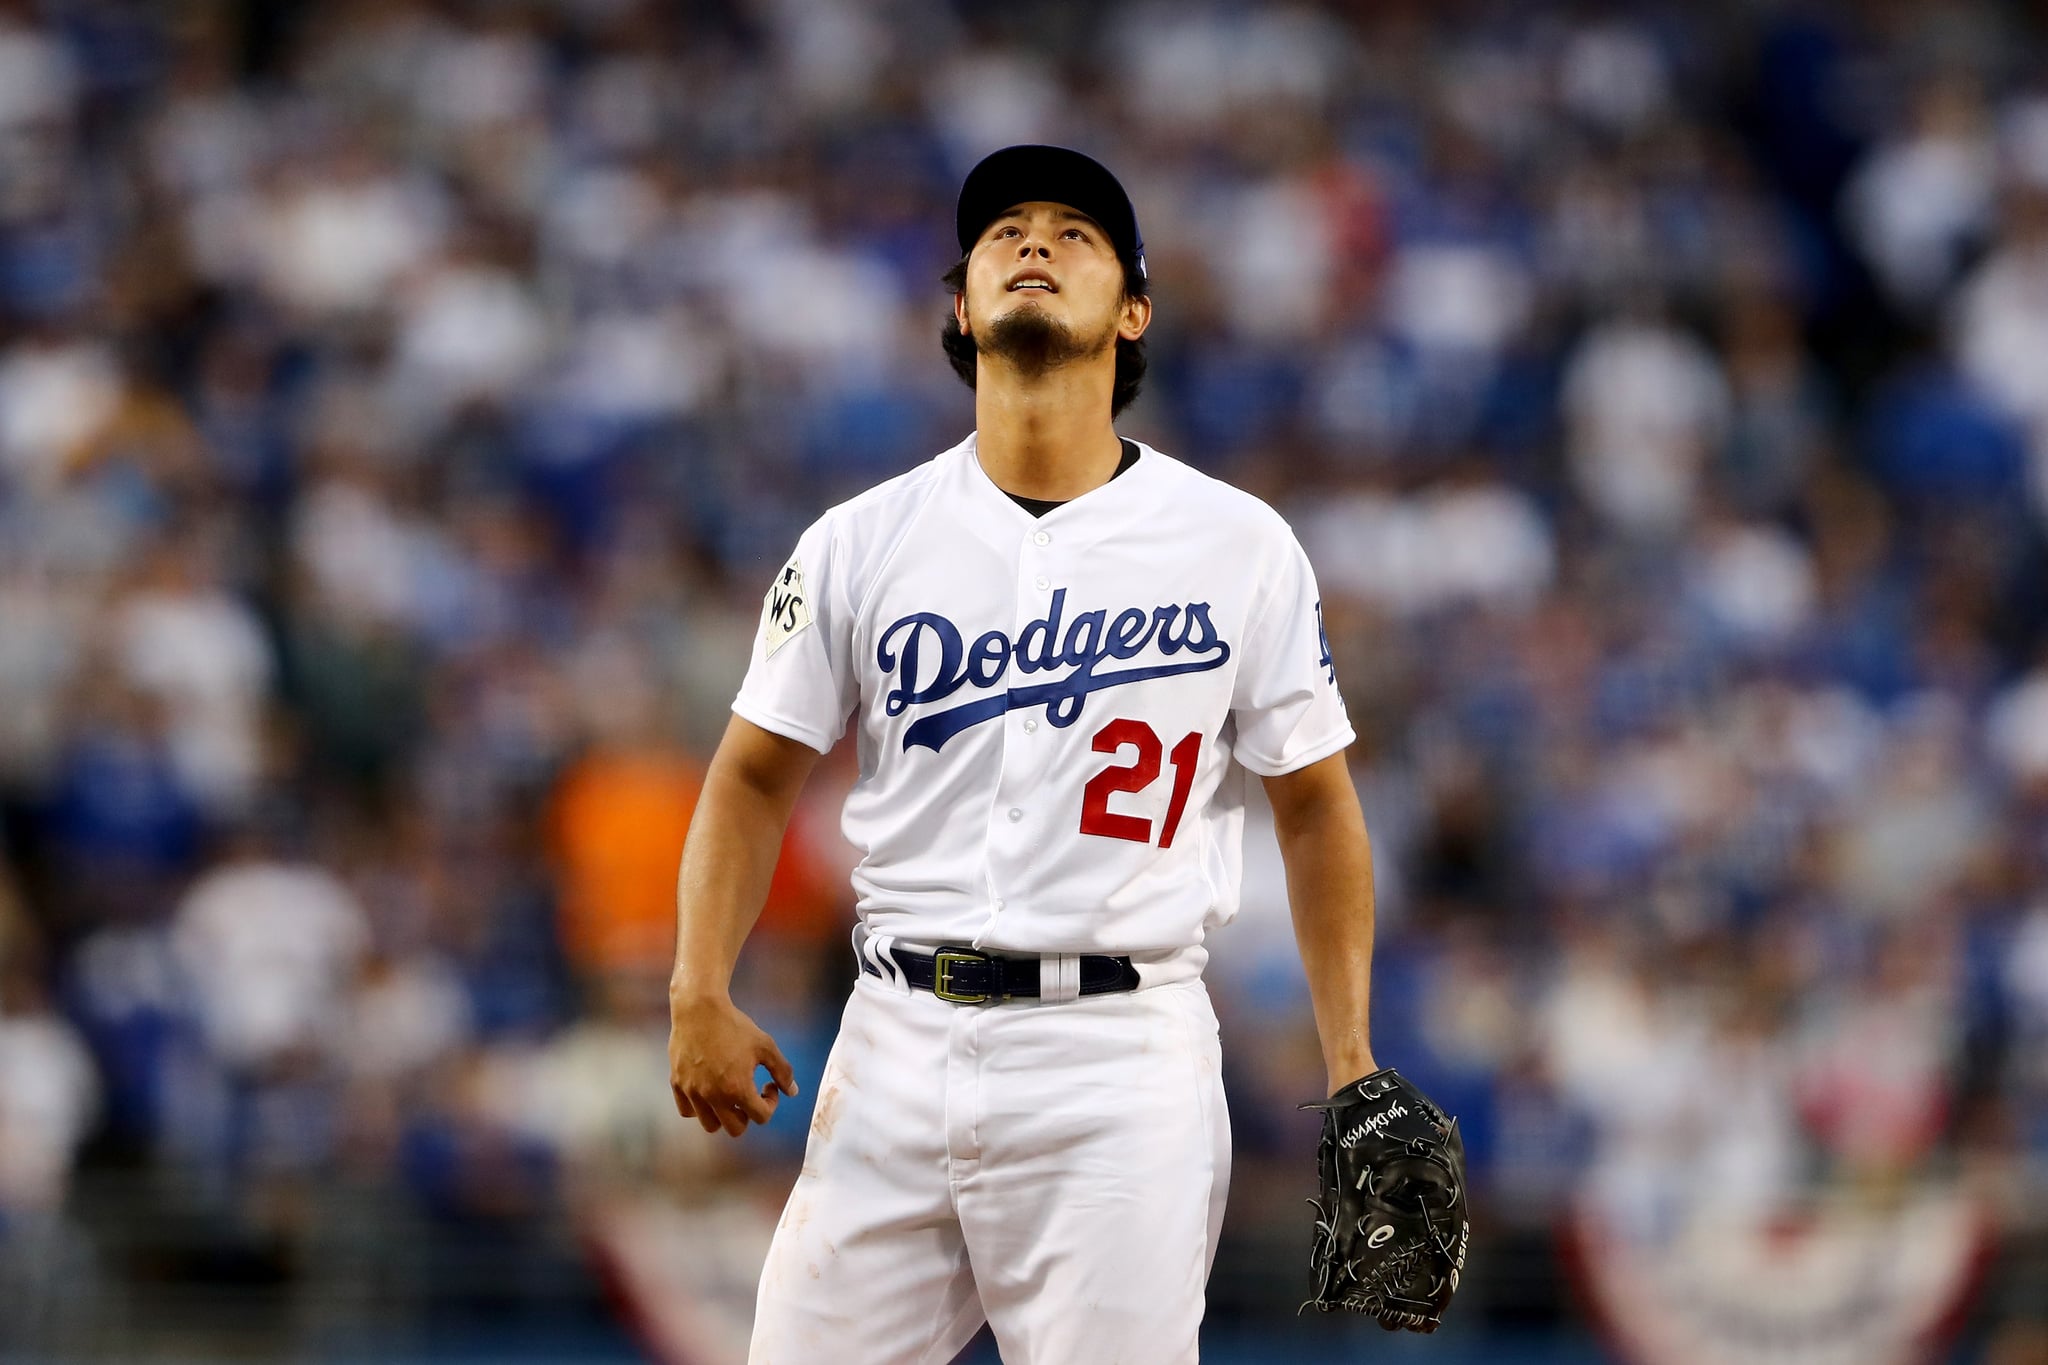 Yu Darvish's father Farsad wanted him to pitch for the Sox. : r/redsox